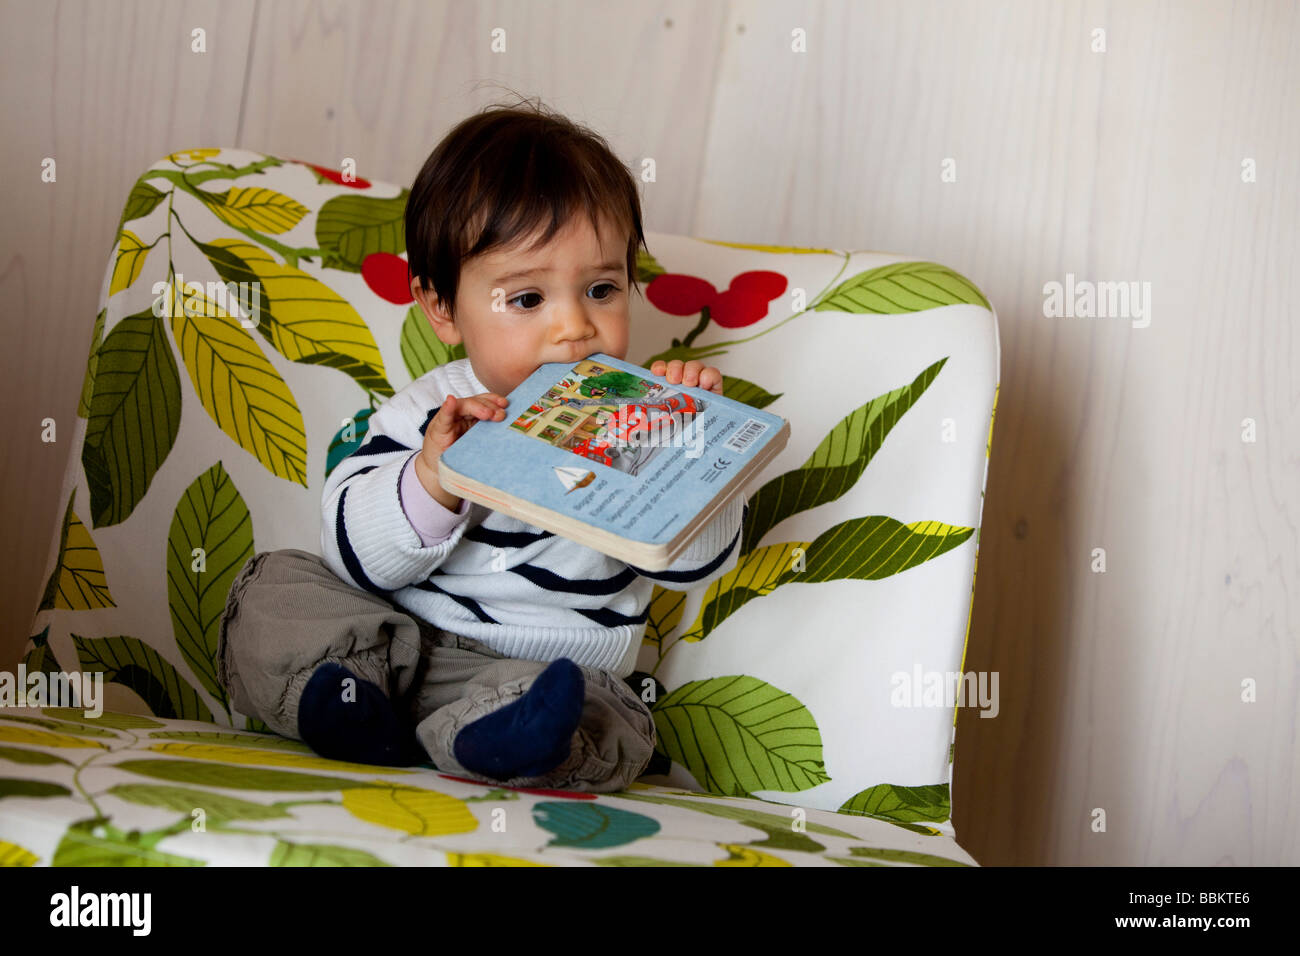 Nine-month-old baby sitting in a chair and biting into a book Stock Photo